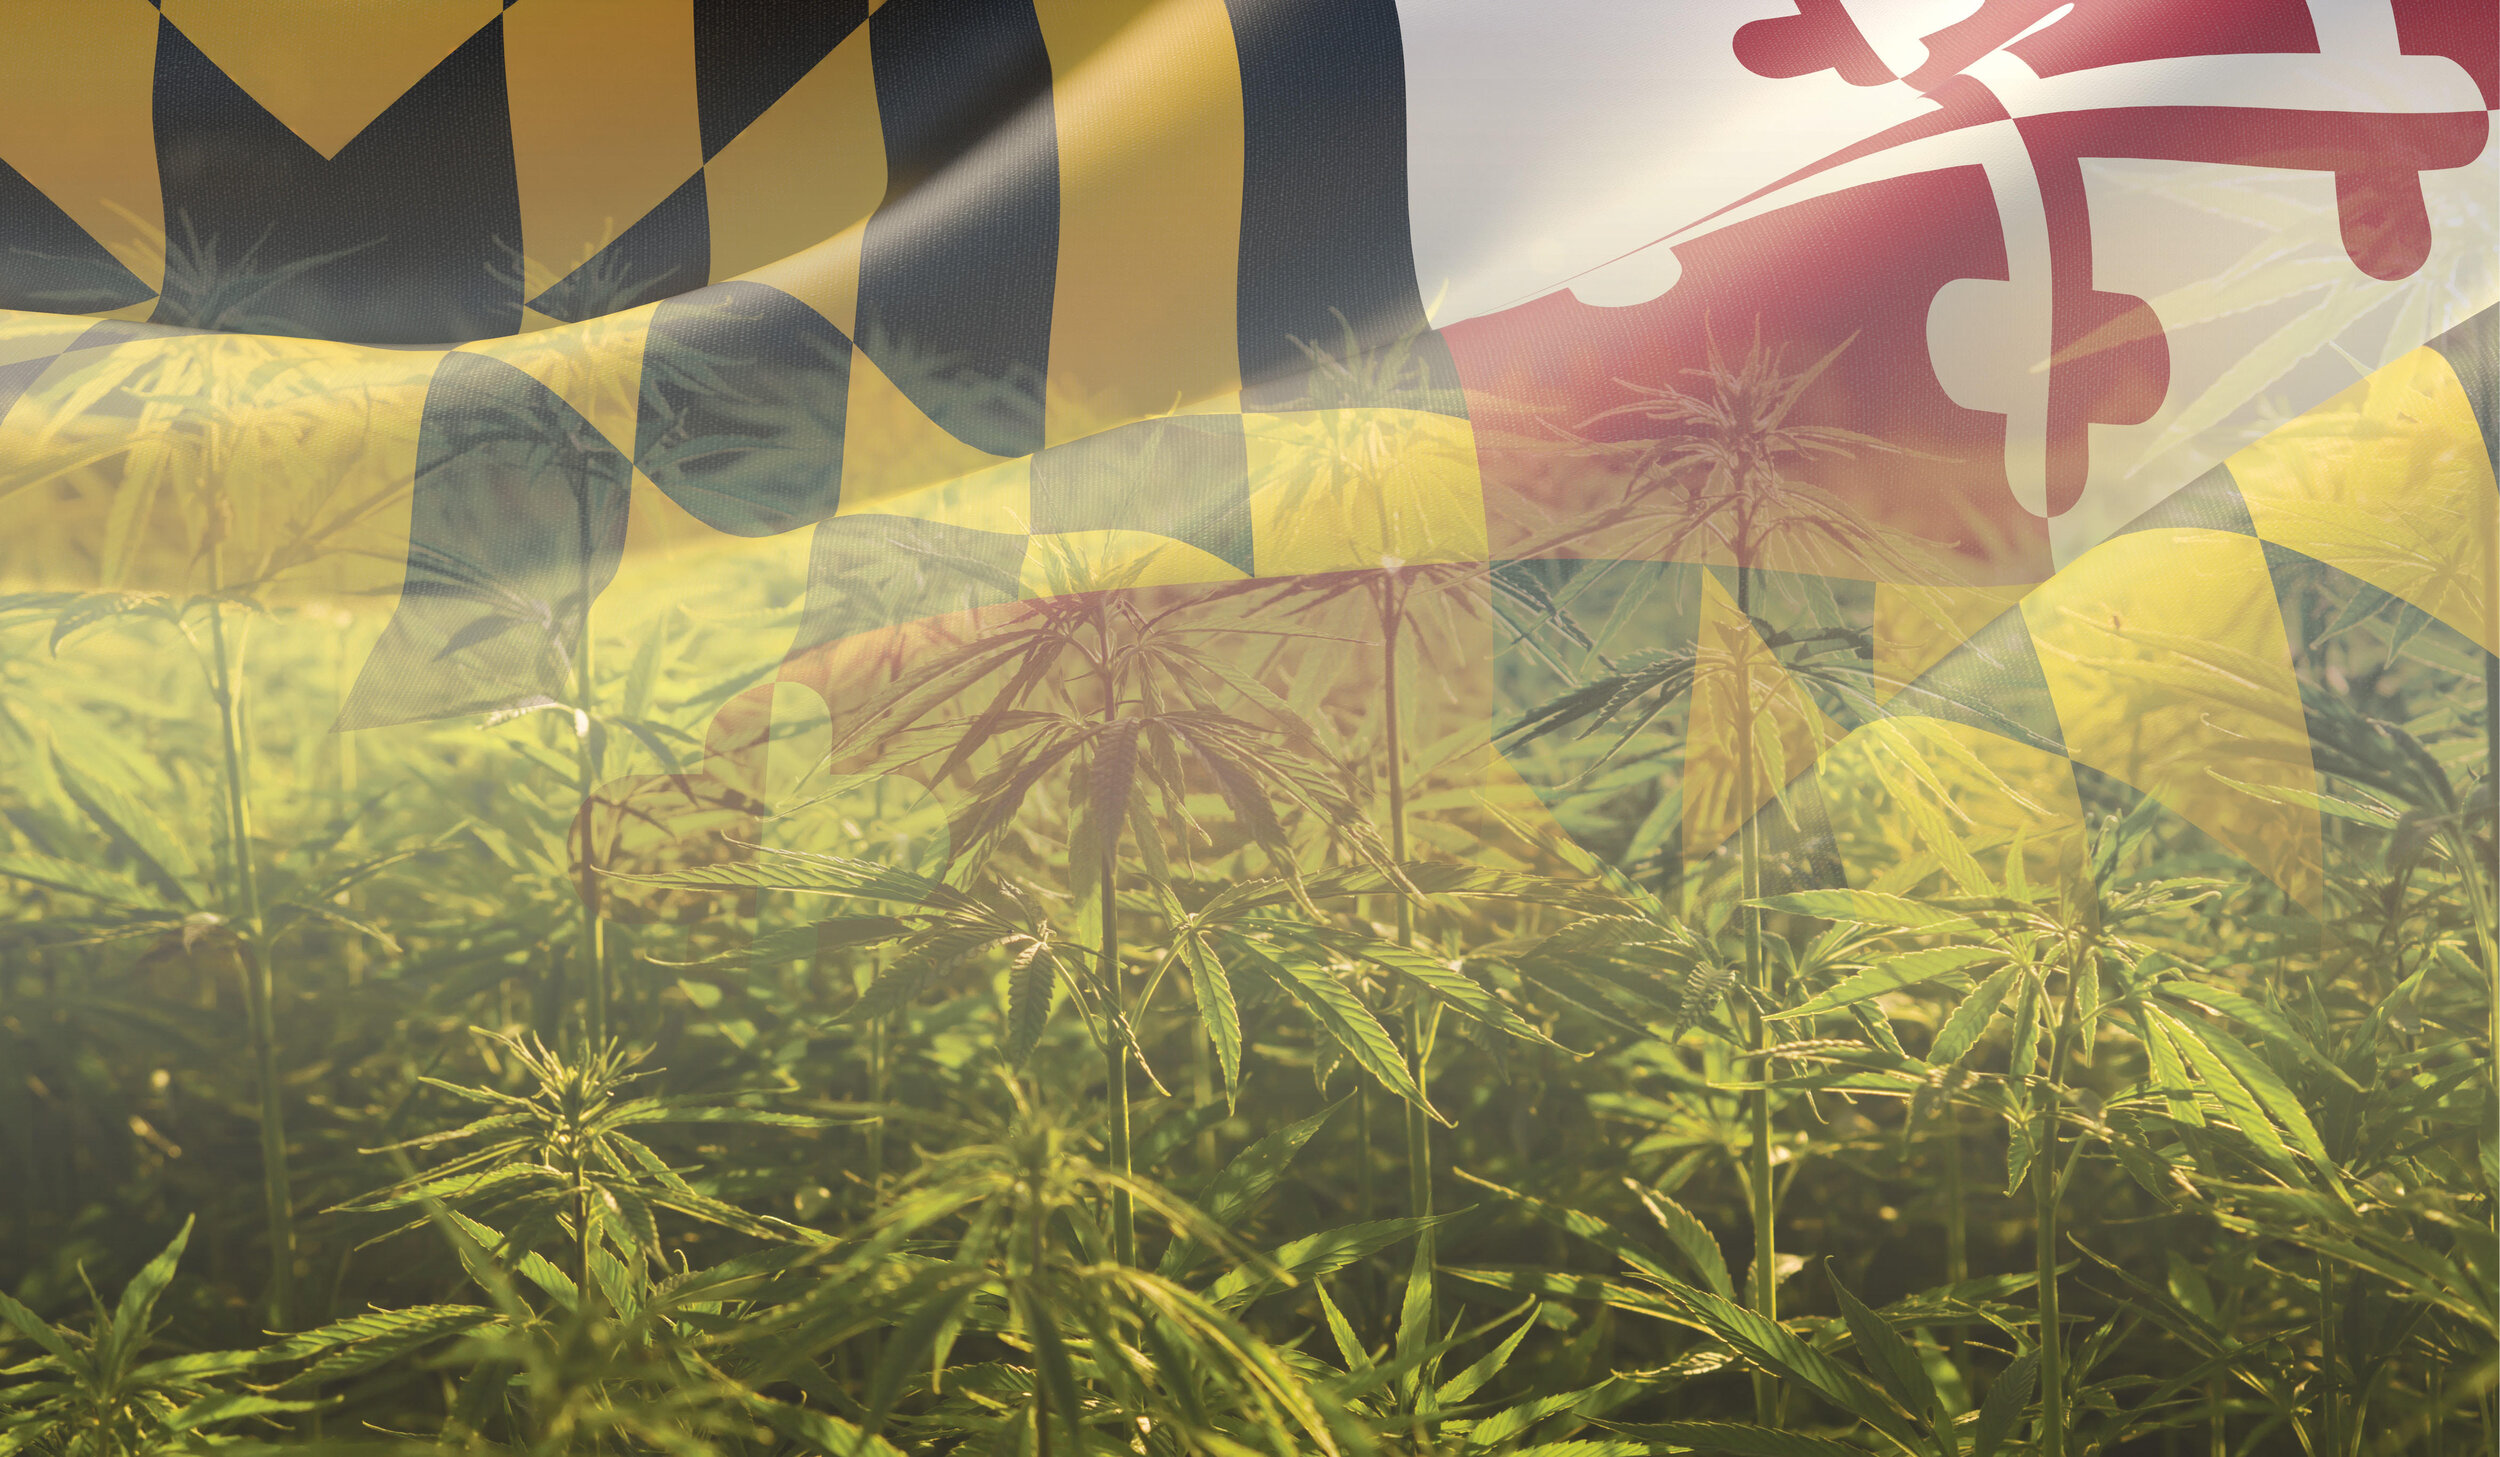 Vacancy Opens On Maryland Medical Cannabis Commission As Member Resigns To Run For Office